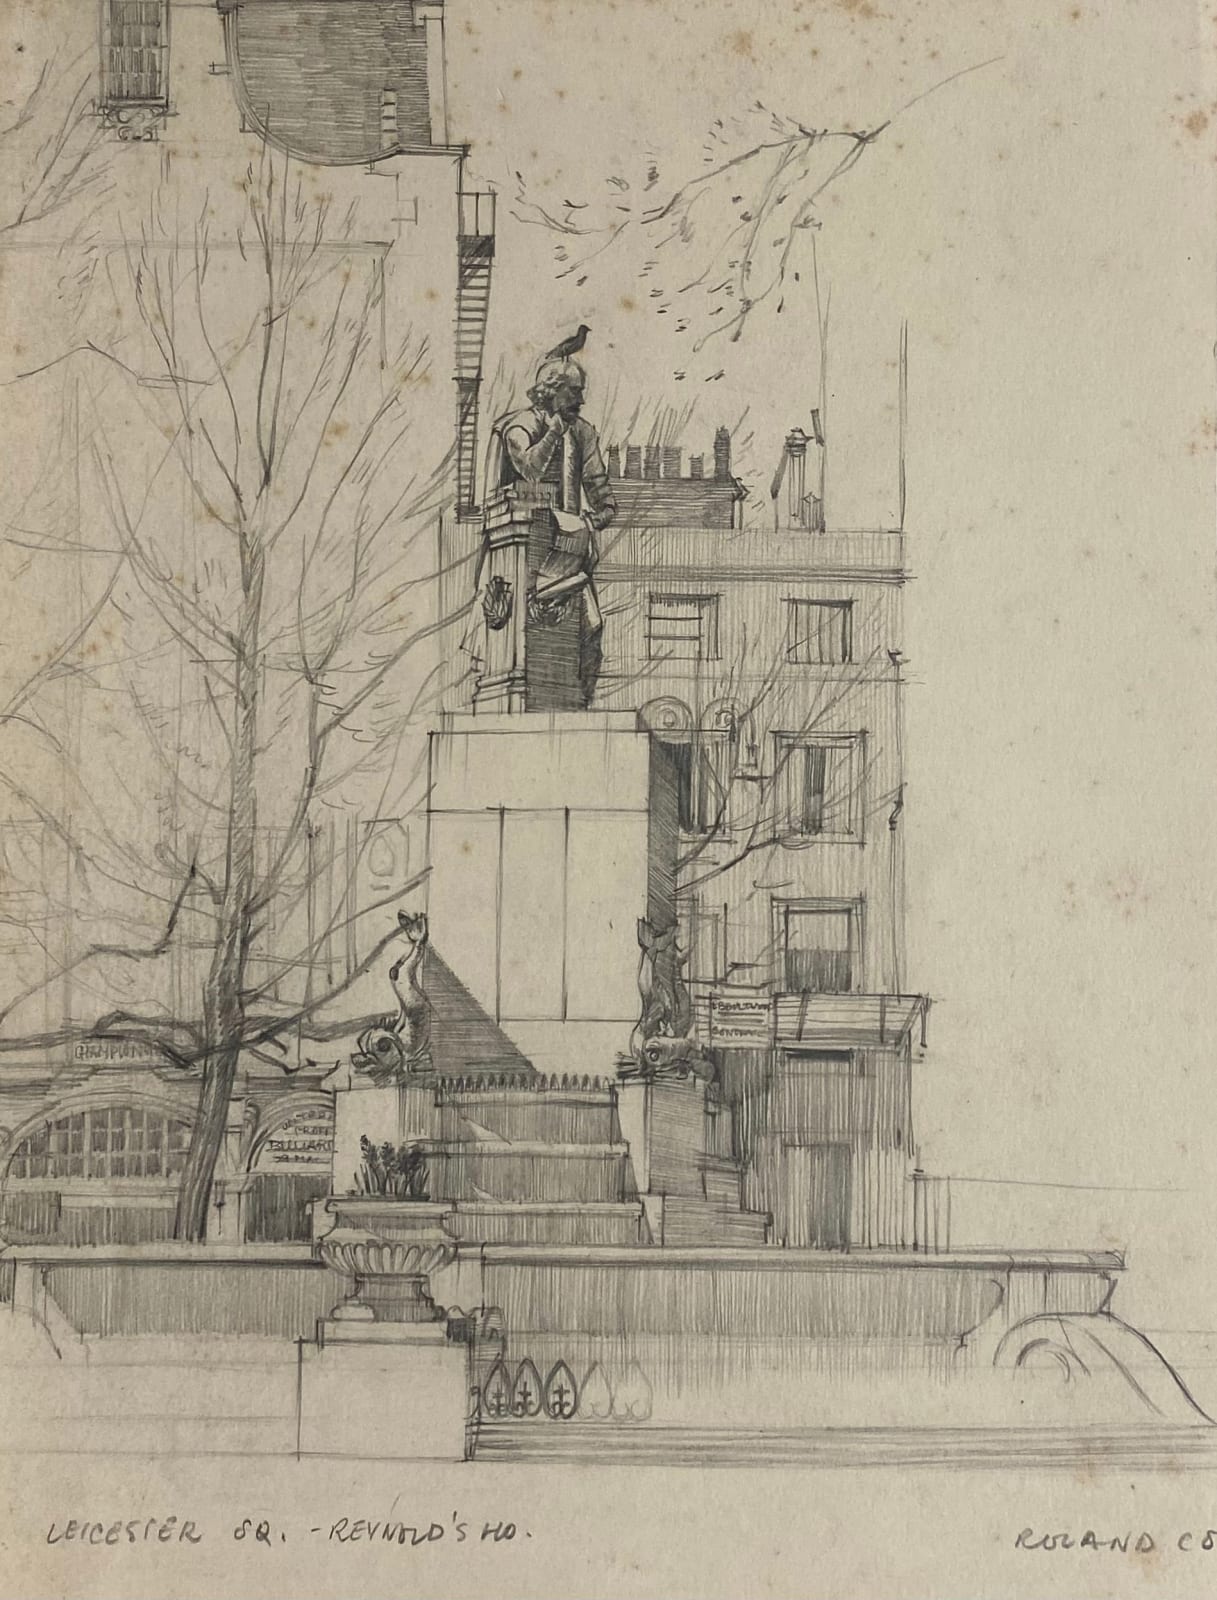 Roland Collins, Leicester Square - Reynold's House, London